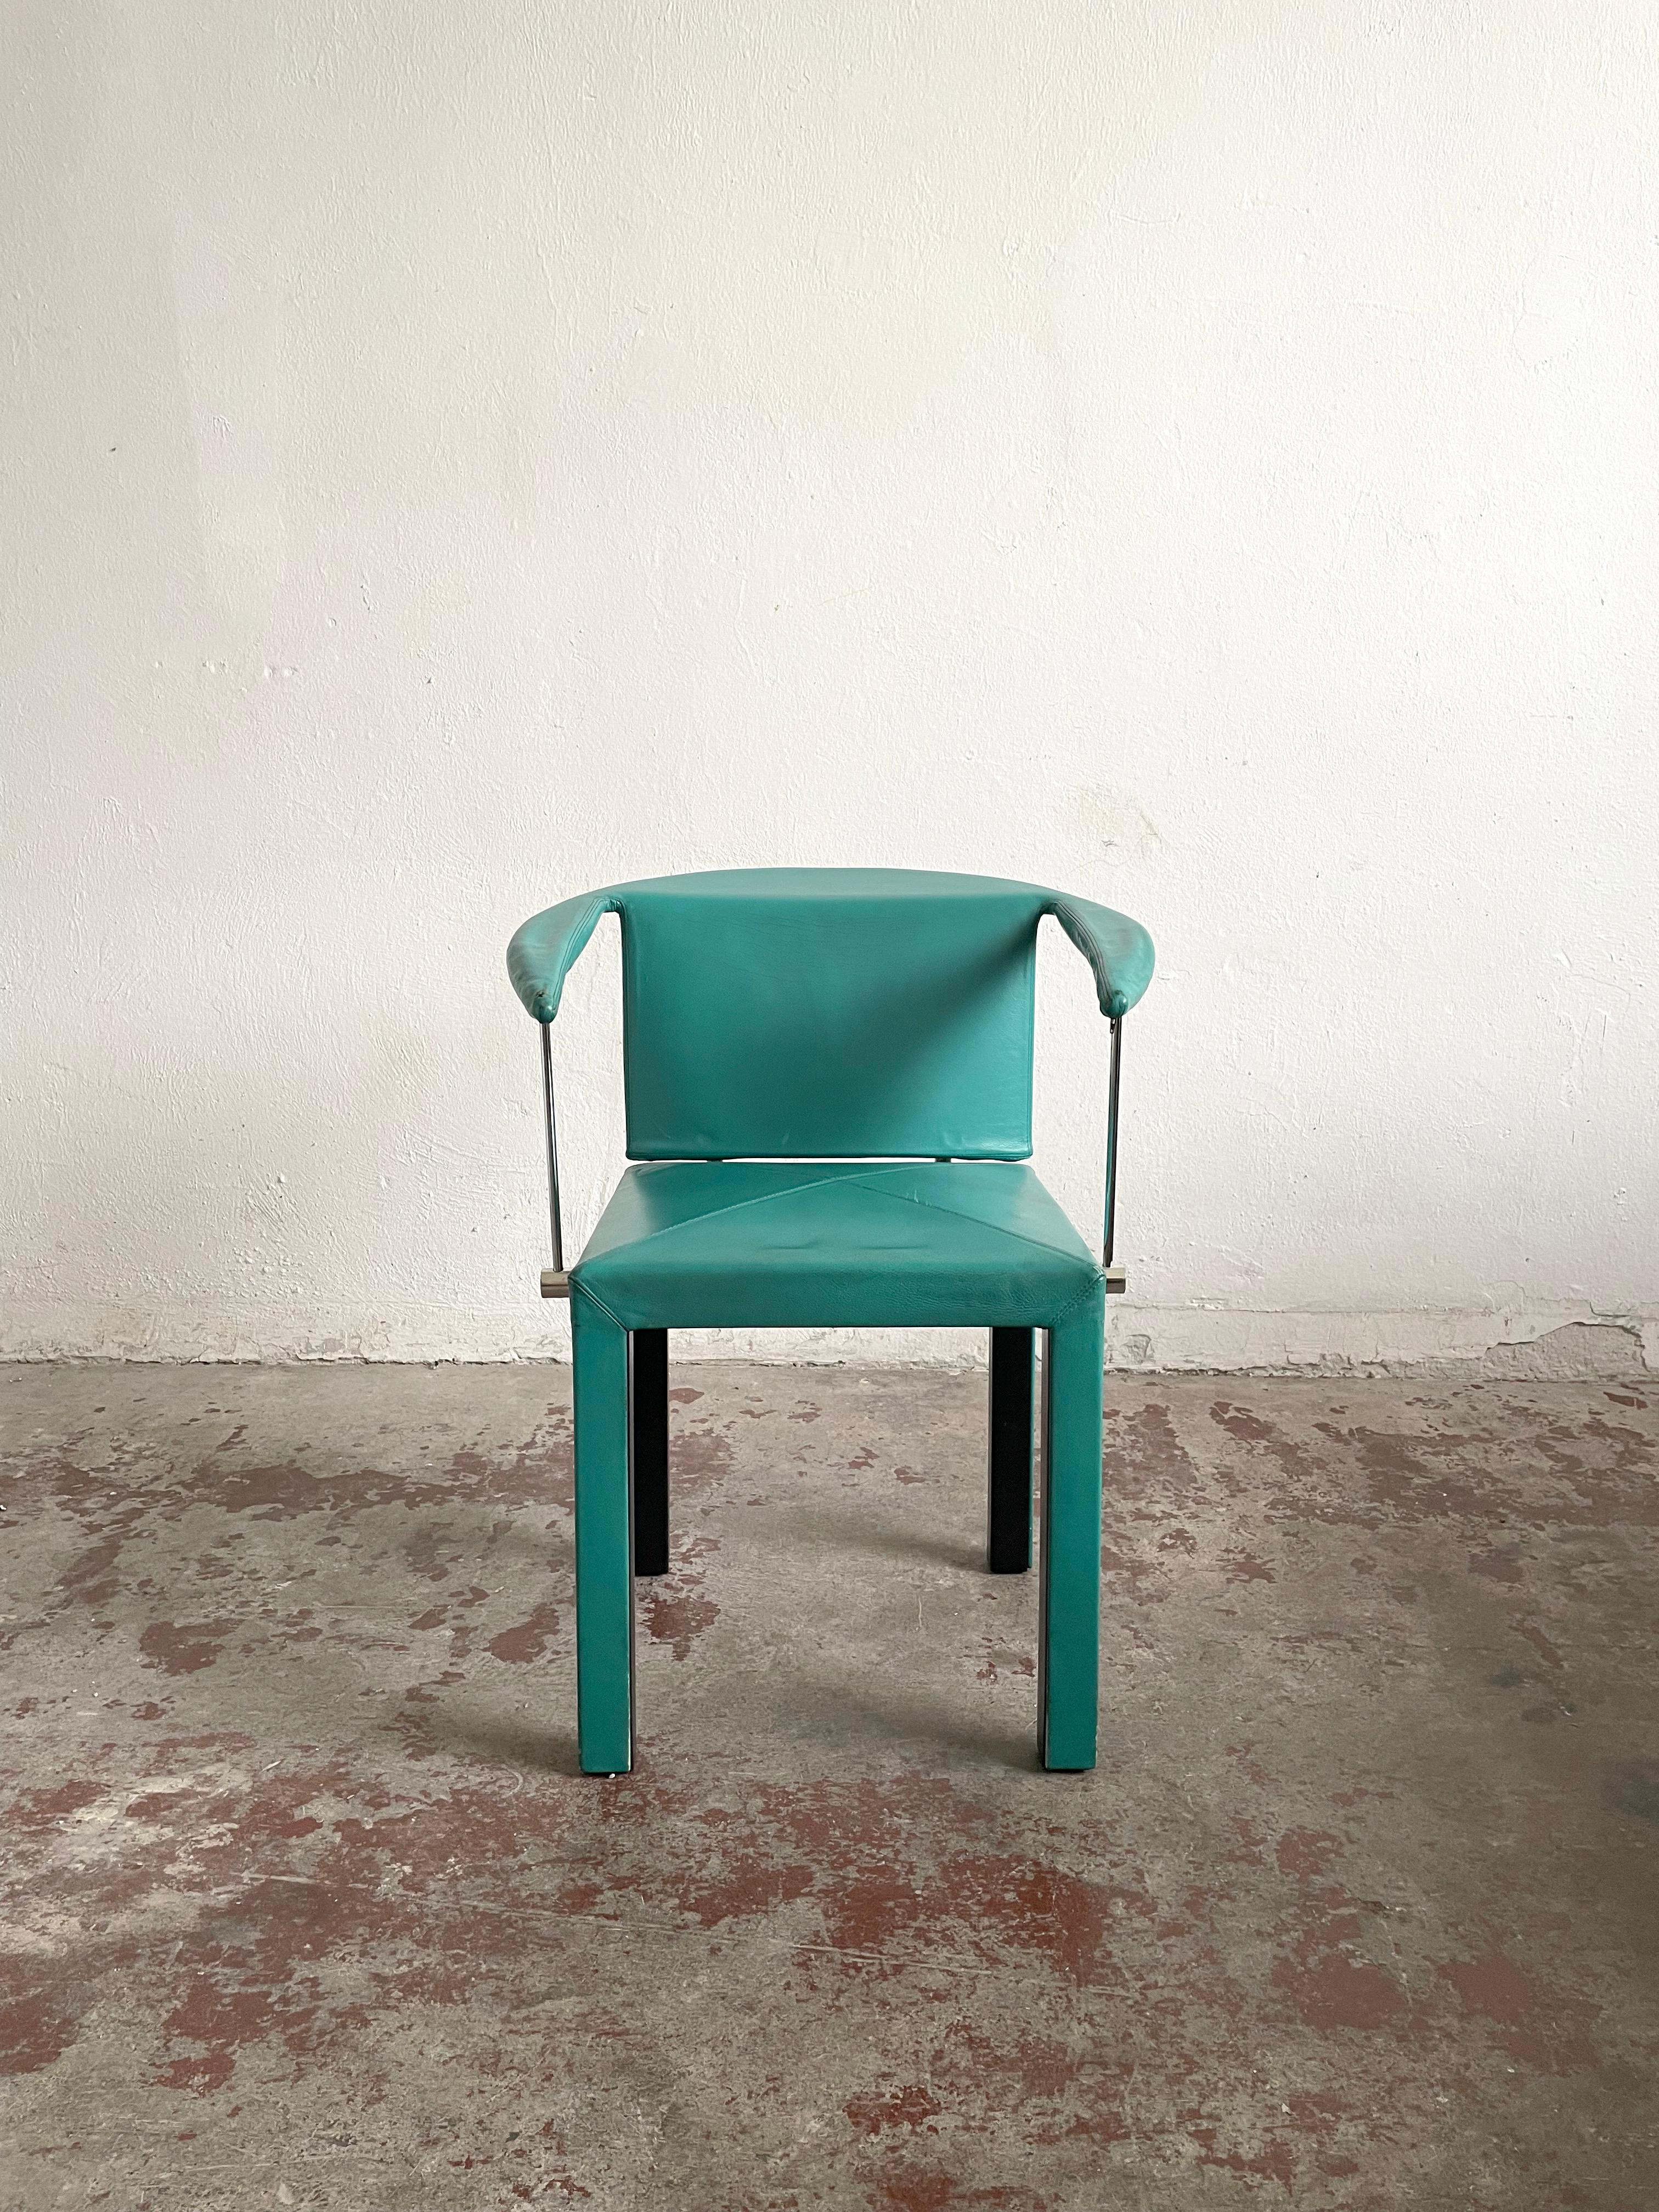 Born in Adria near Venice in 1950, Paolo Piva is one of the most prominent Italian architect-designers of the late 20th century.

Offered here for sale is his Arcella dining chair from Arcadia Series for B & B Italia The chair was produced in